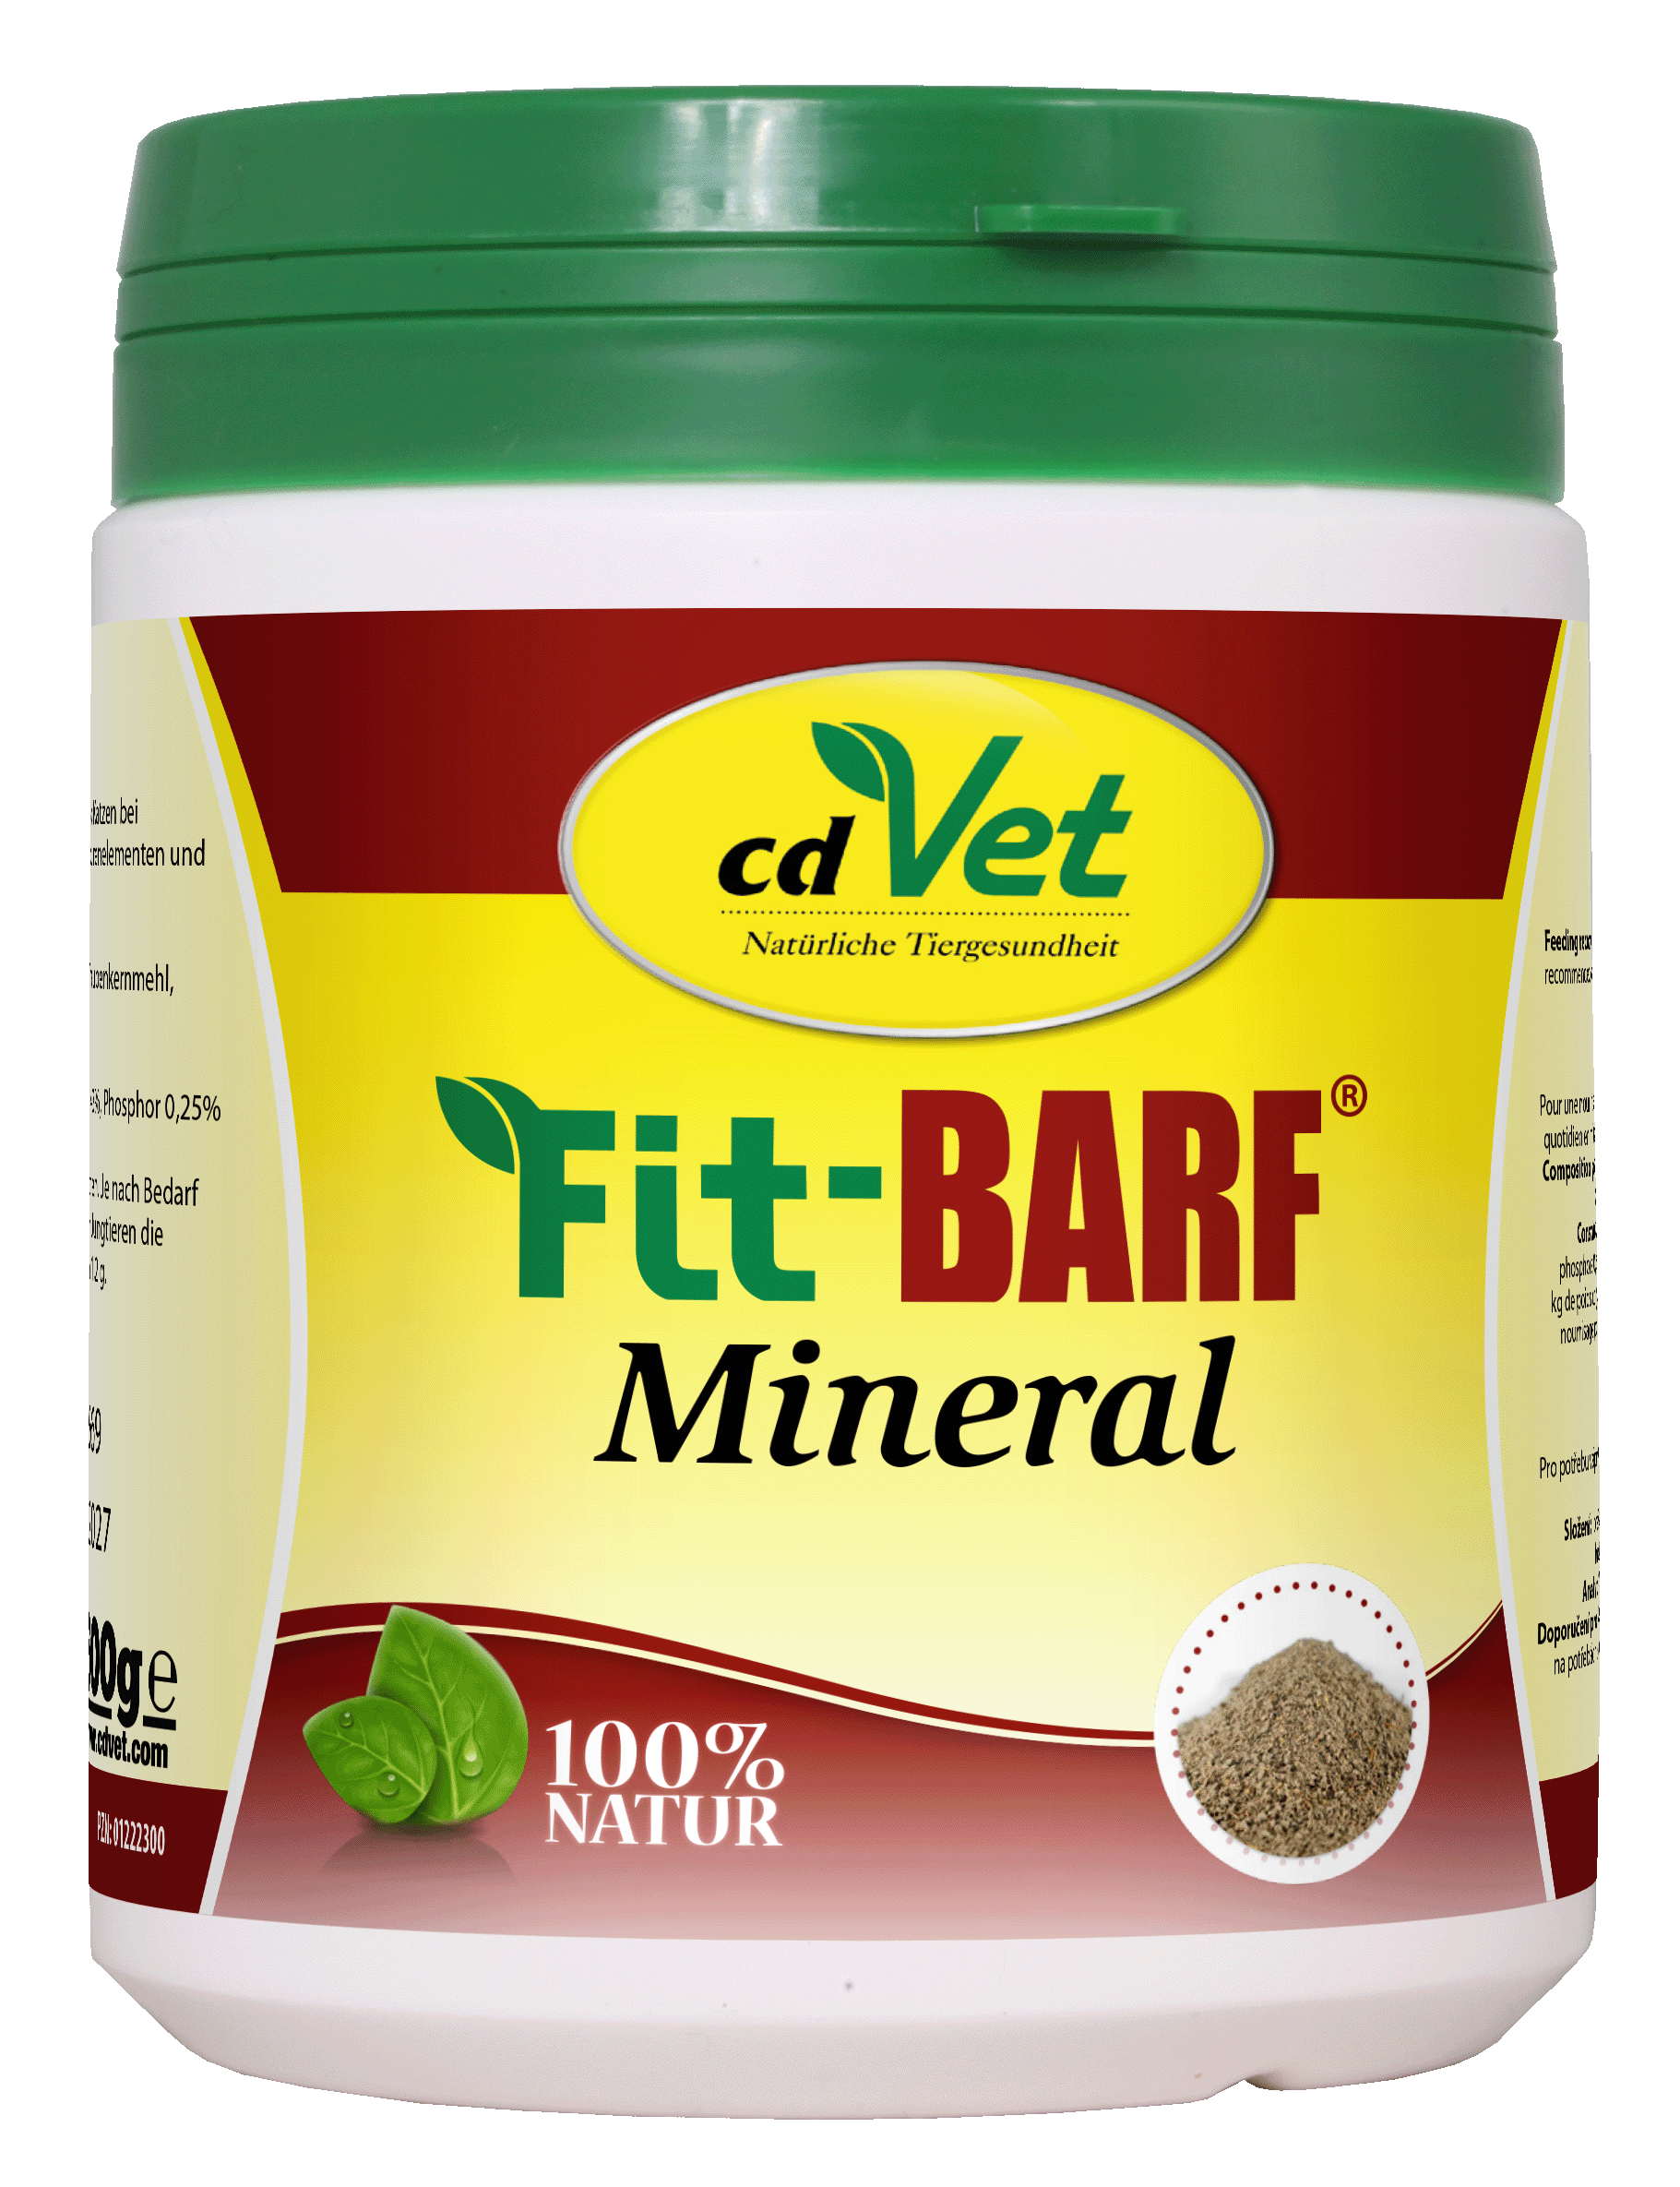 Fit-BARF Mineral 600 g